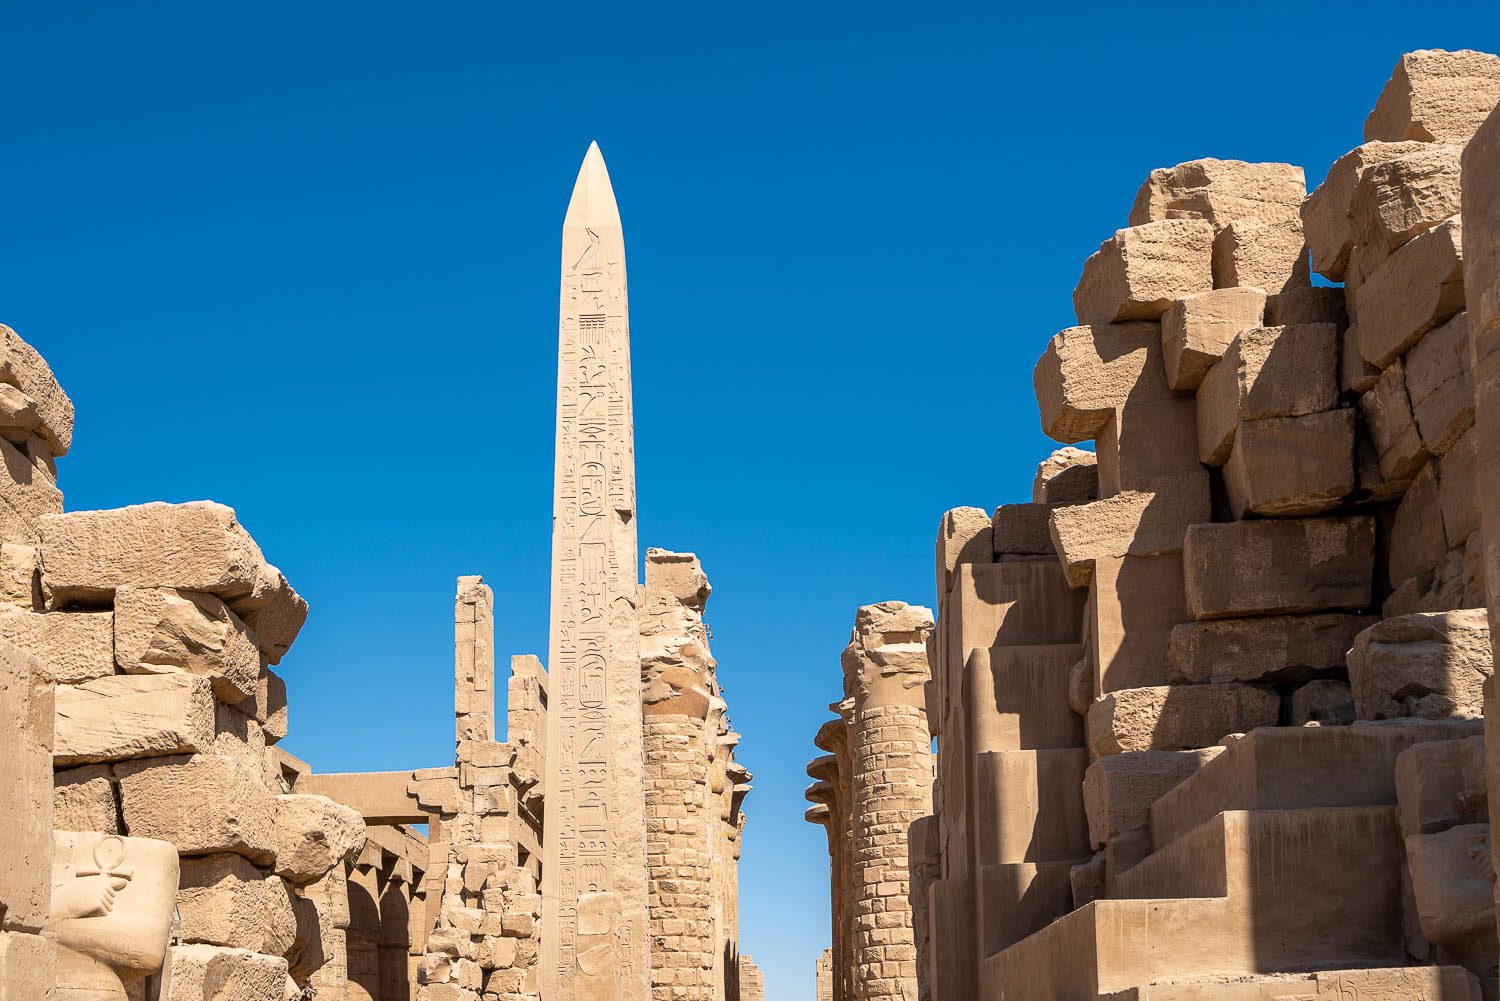 An ancient Egyptian temple complex with towering obelisk, hieroglyphs, and stone ruins under a clear blue sky, exhibiting historic architecture and archaeological significance.